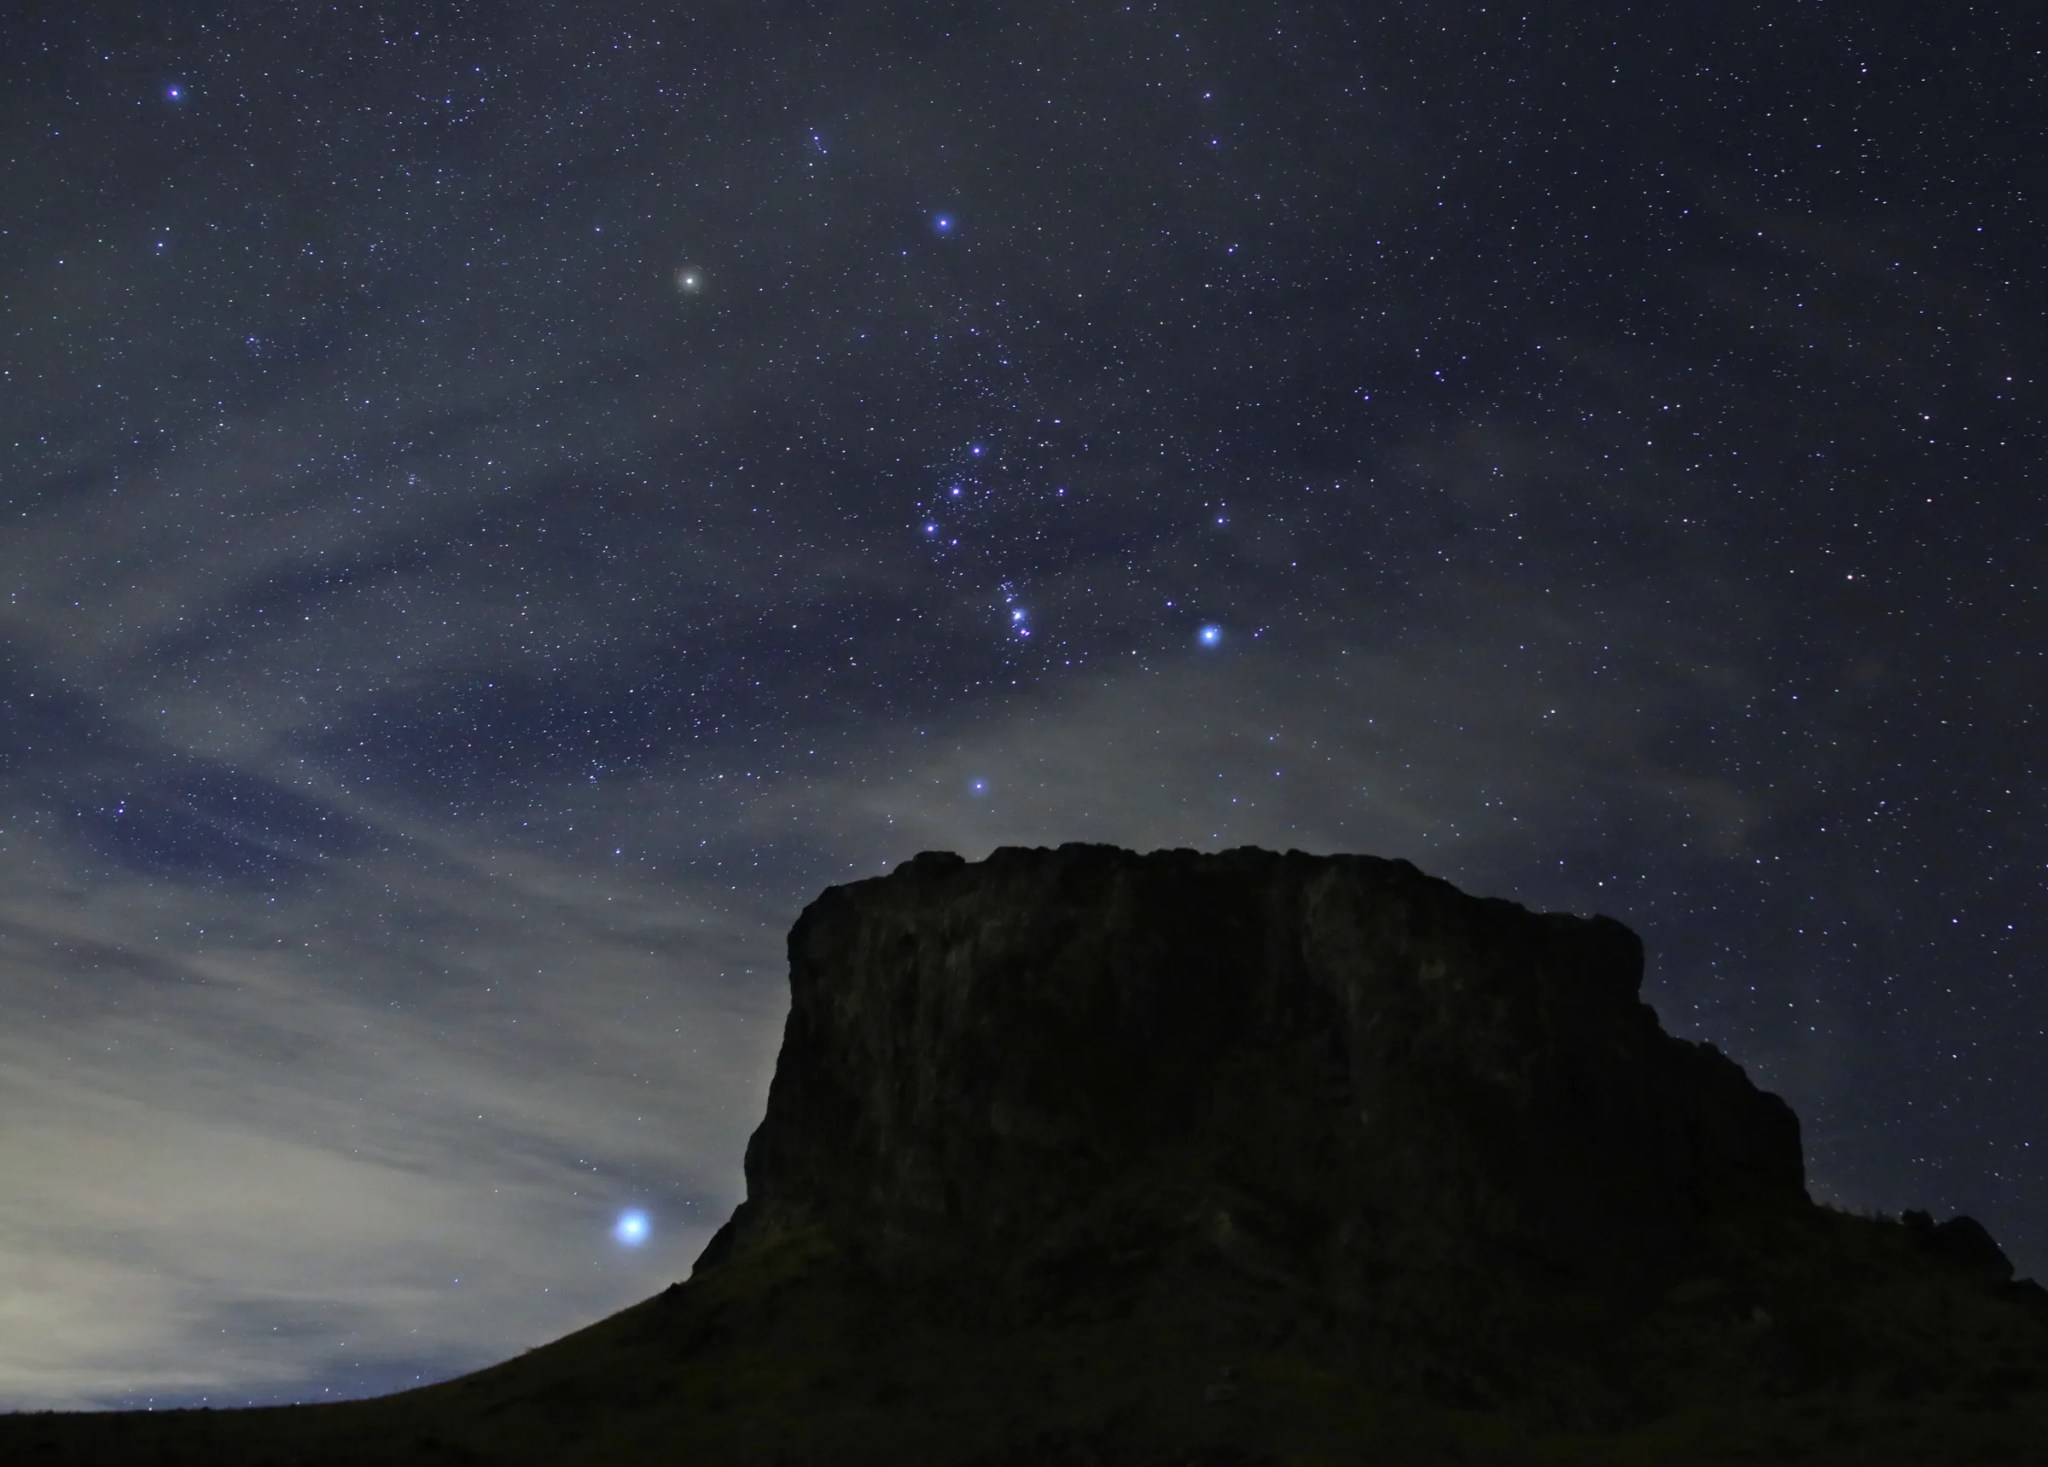 The bright stars in the constellation Orion appear above a rocky mesa at night. The bright star Sirius is seen to the left of the mesa.